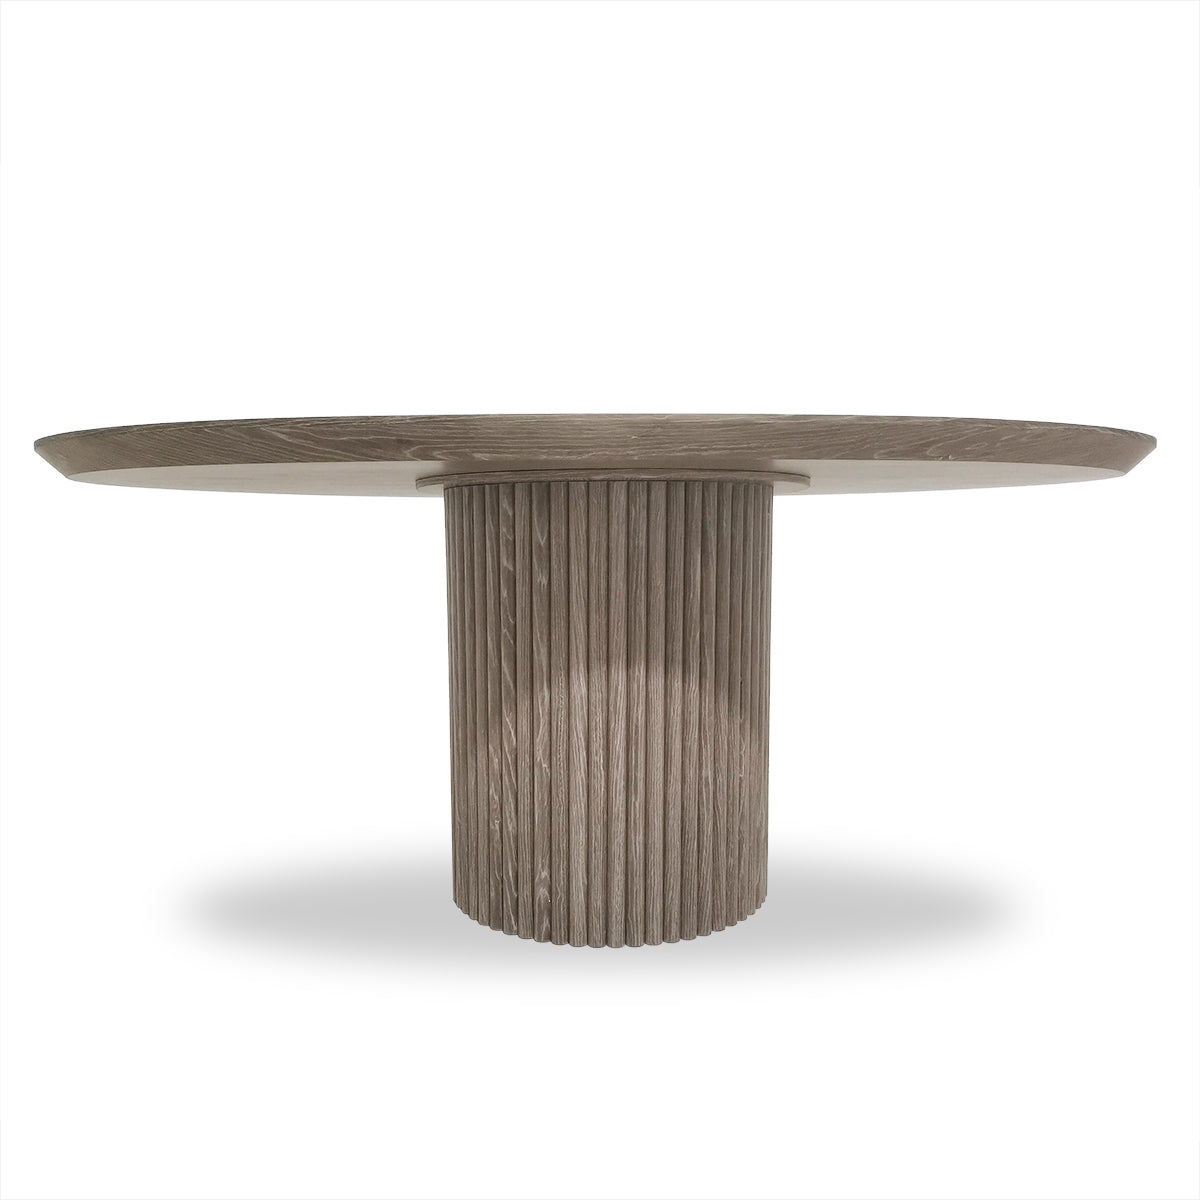 Ubud Oval Dining Table with Light Oak Top with Sealer